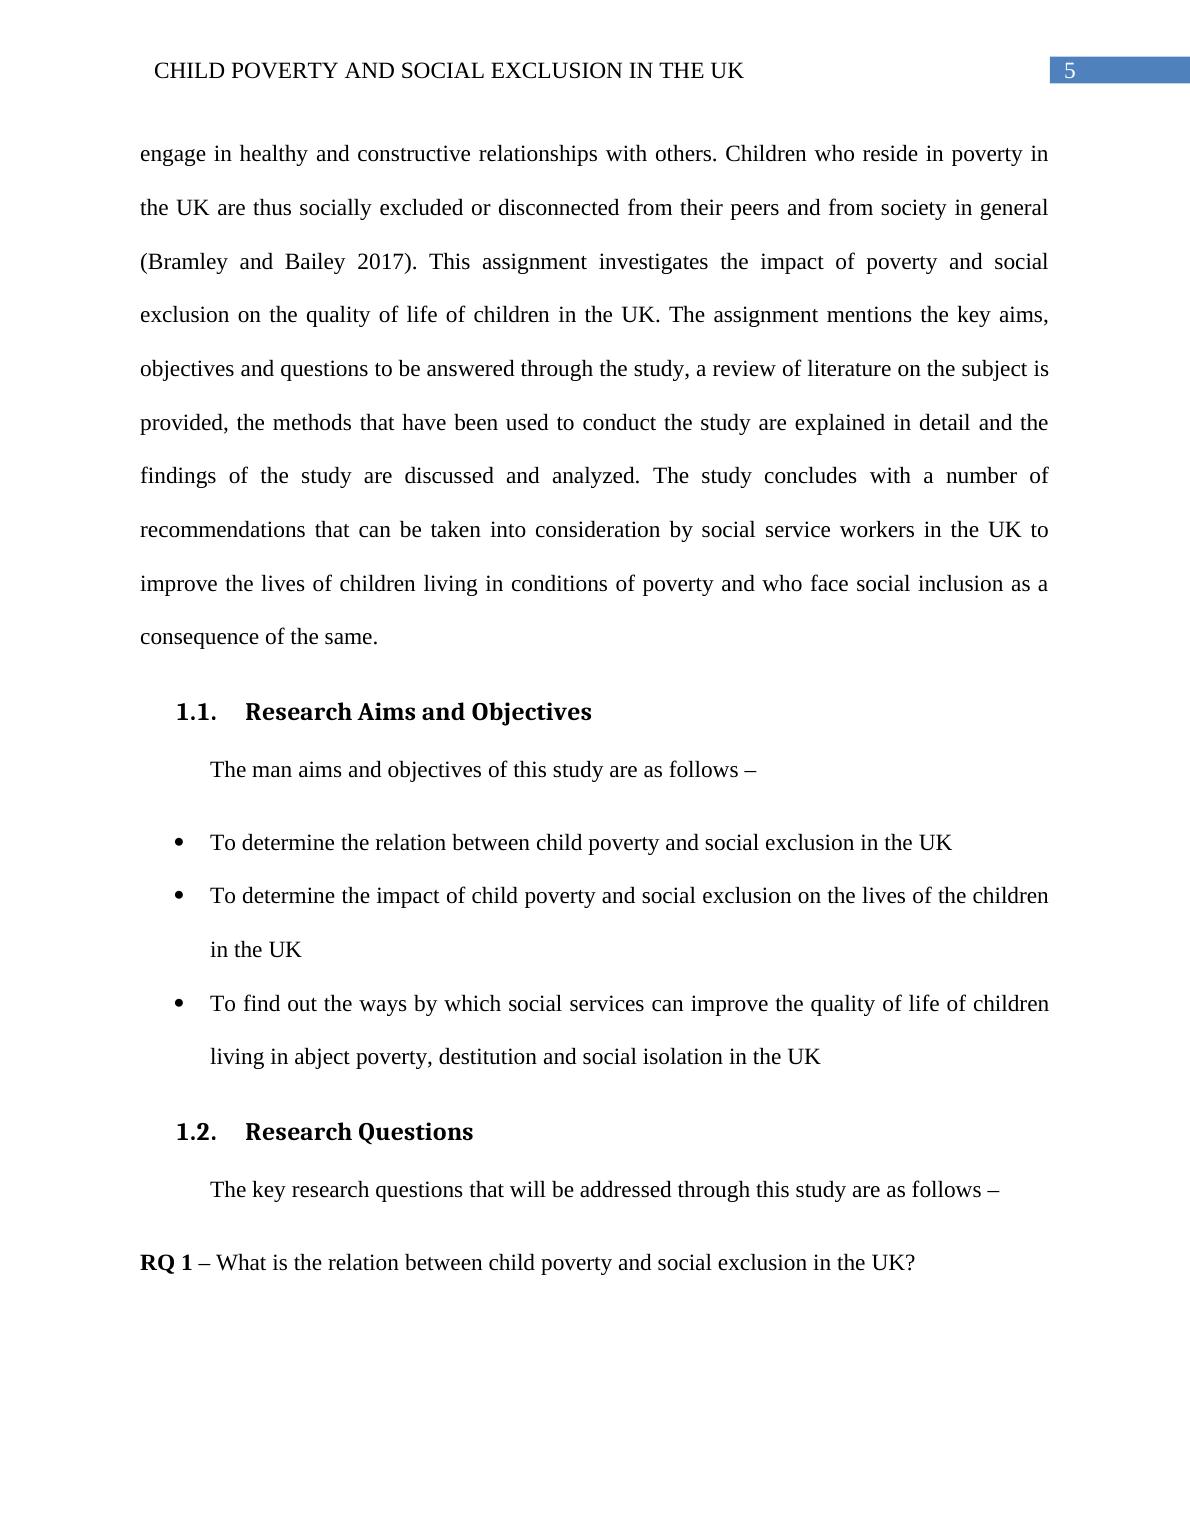 Child Poverty and Social Exclusion in the UK Assignment 2022_6